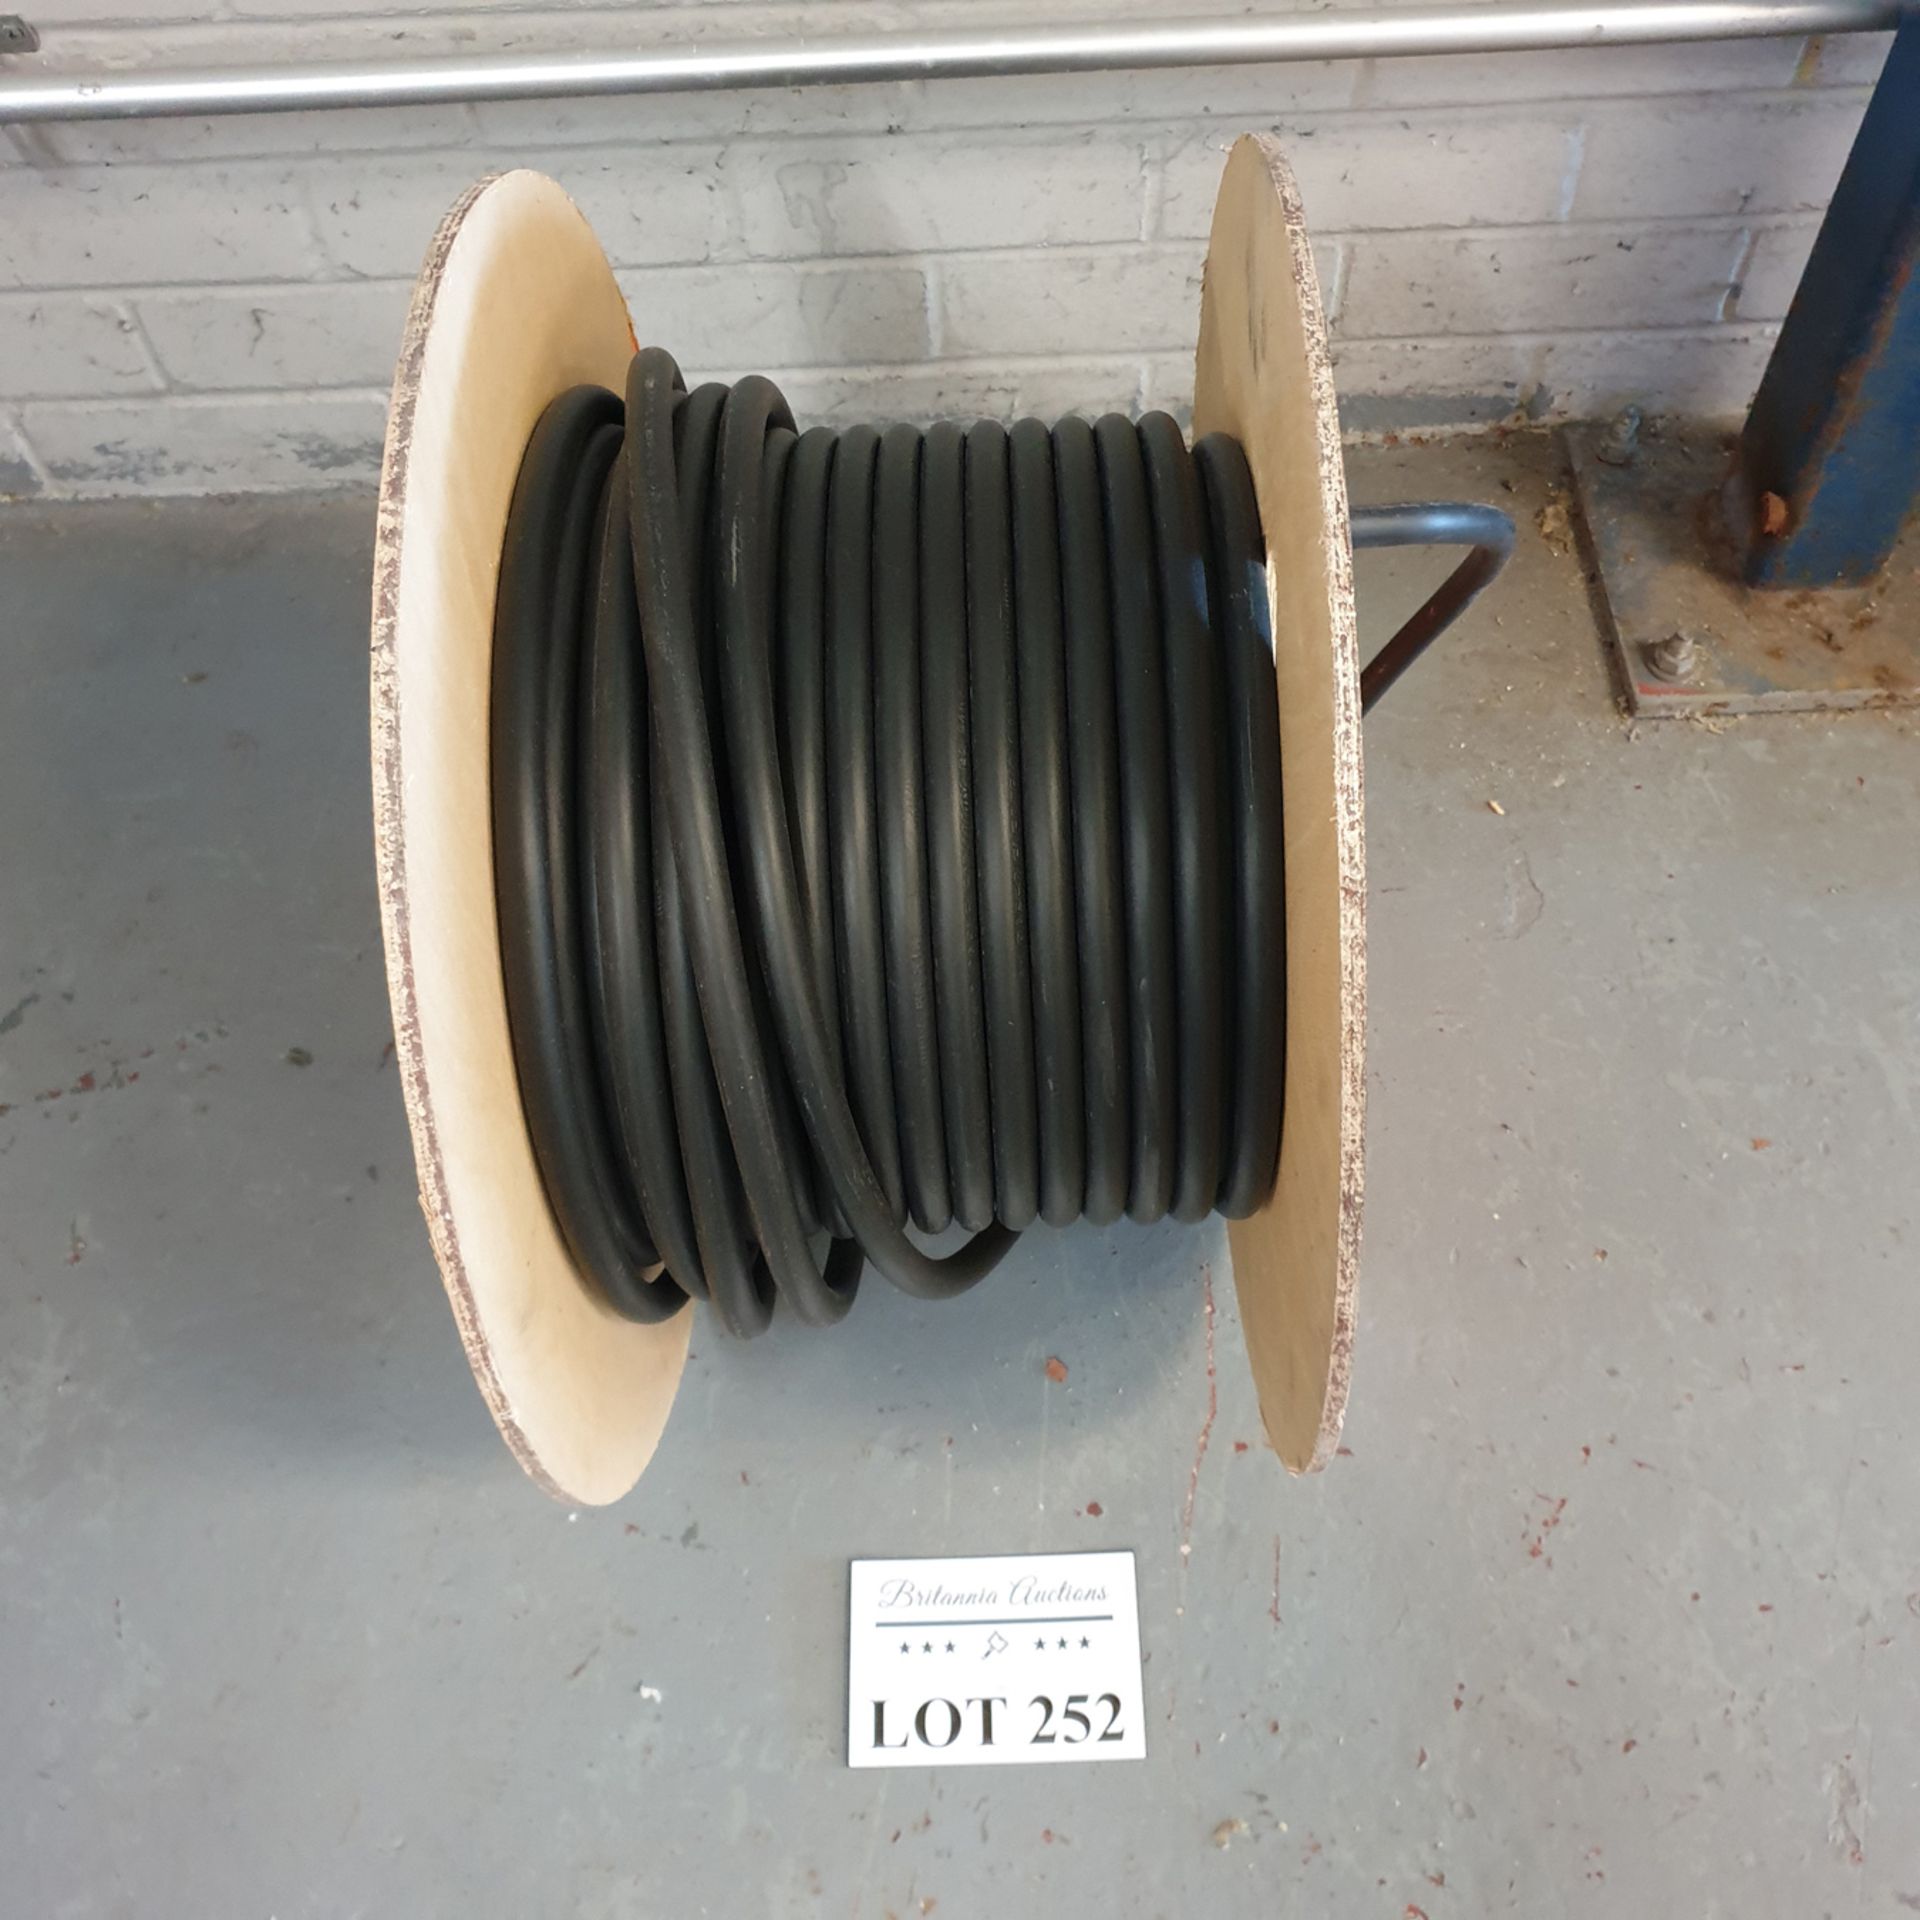 Reel of Heavy Duty 3 Core Cable. - Image 2 of 3